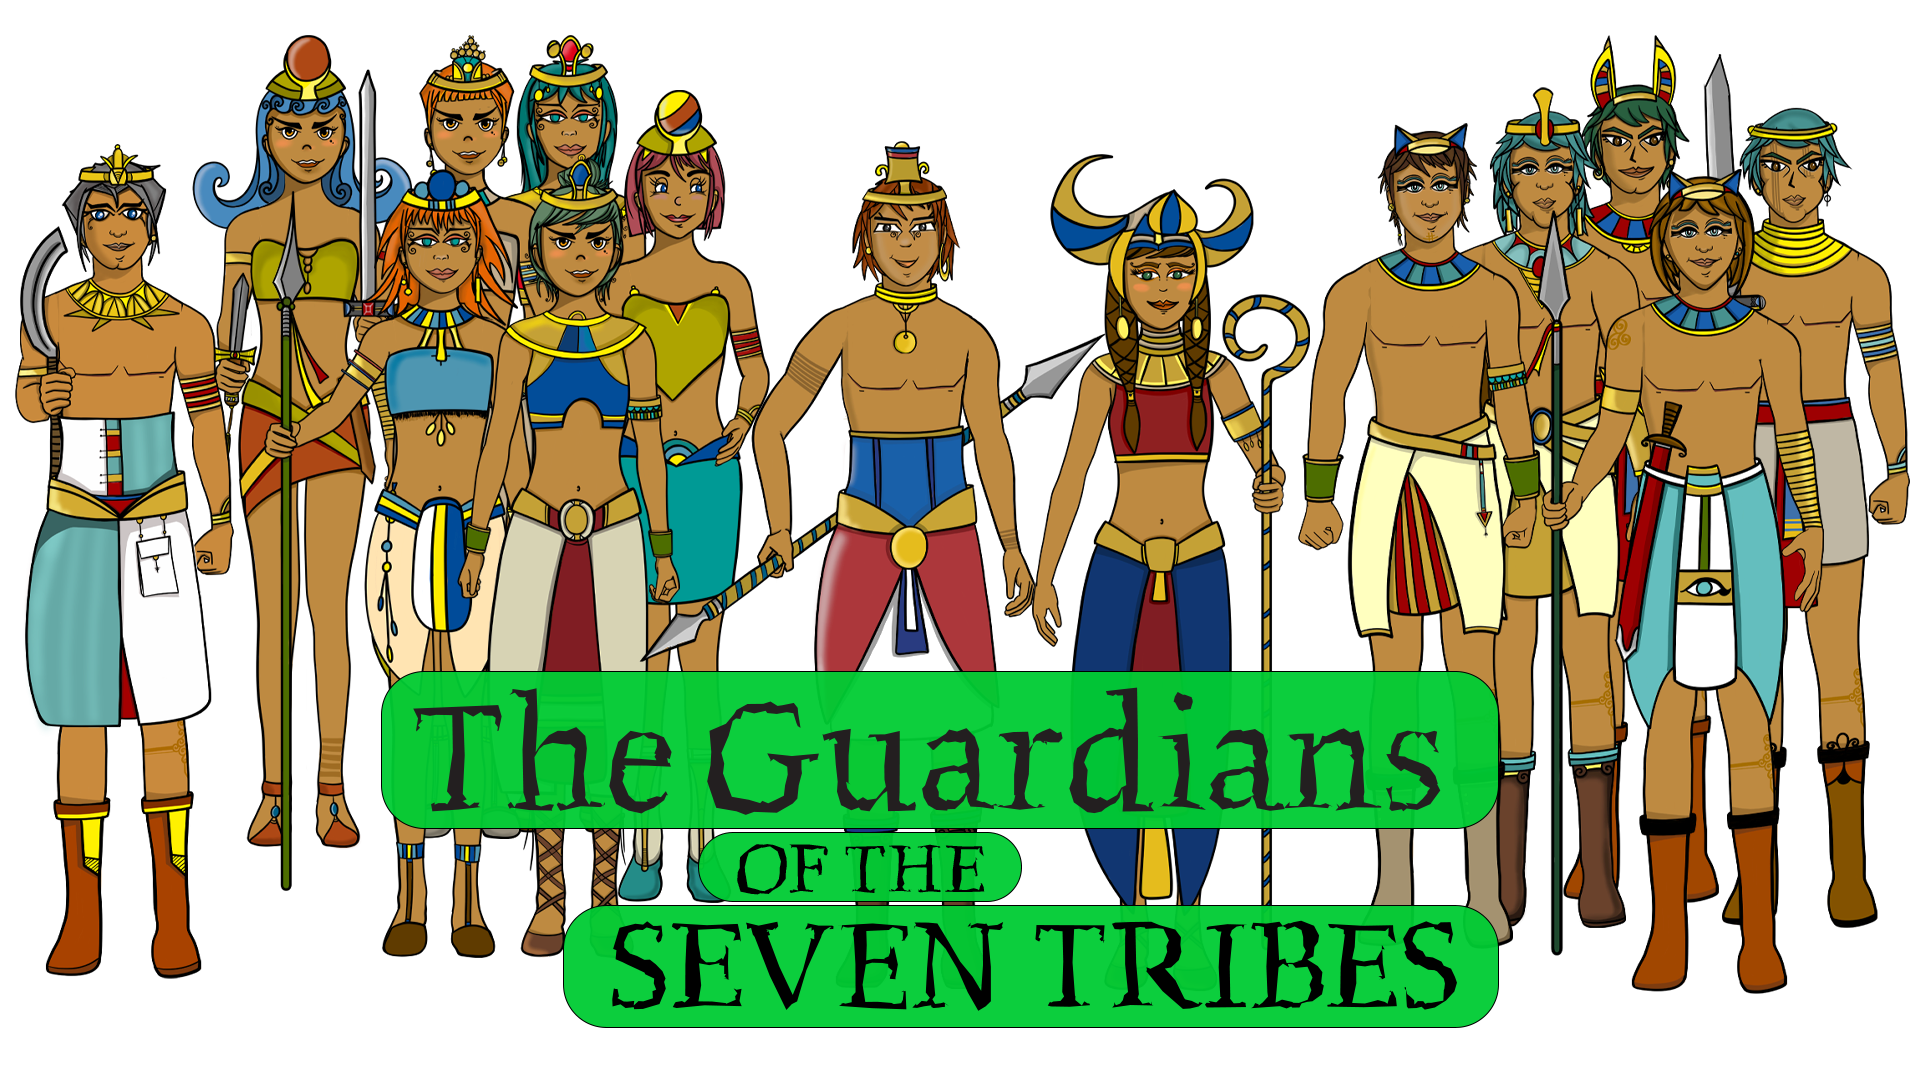 Celestial Protectors: Guardians of the Seven Tribes